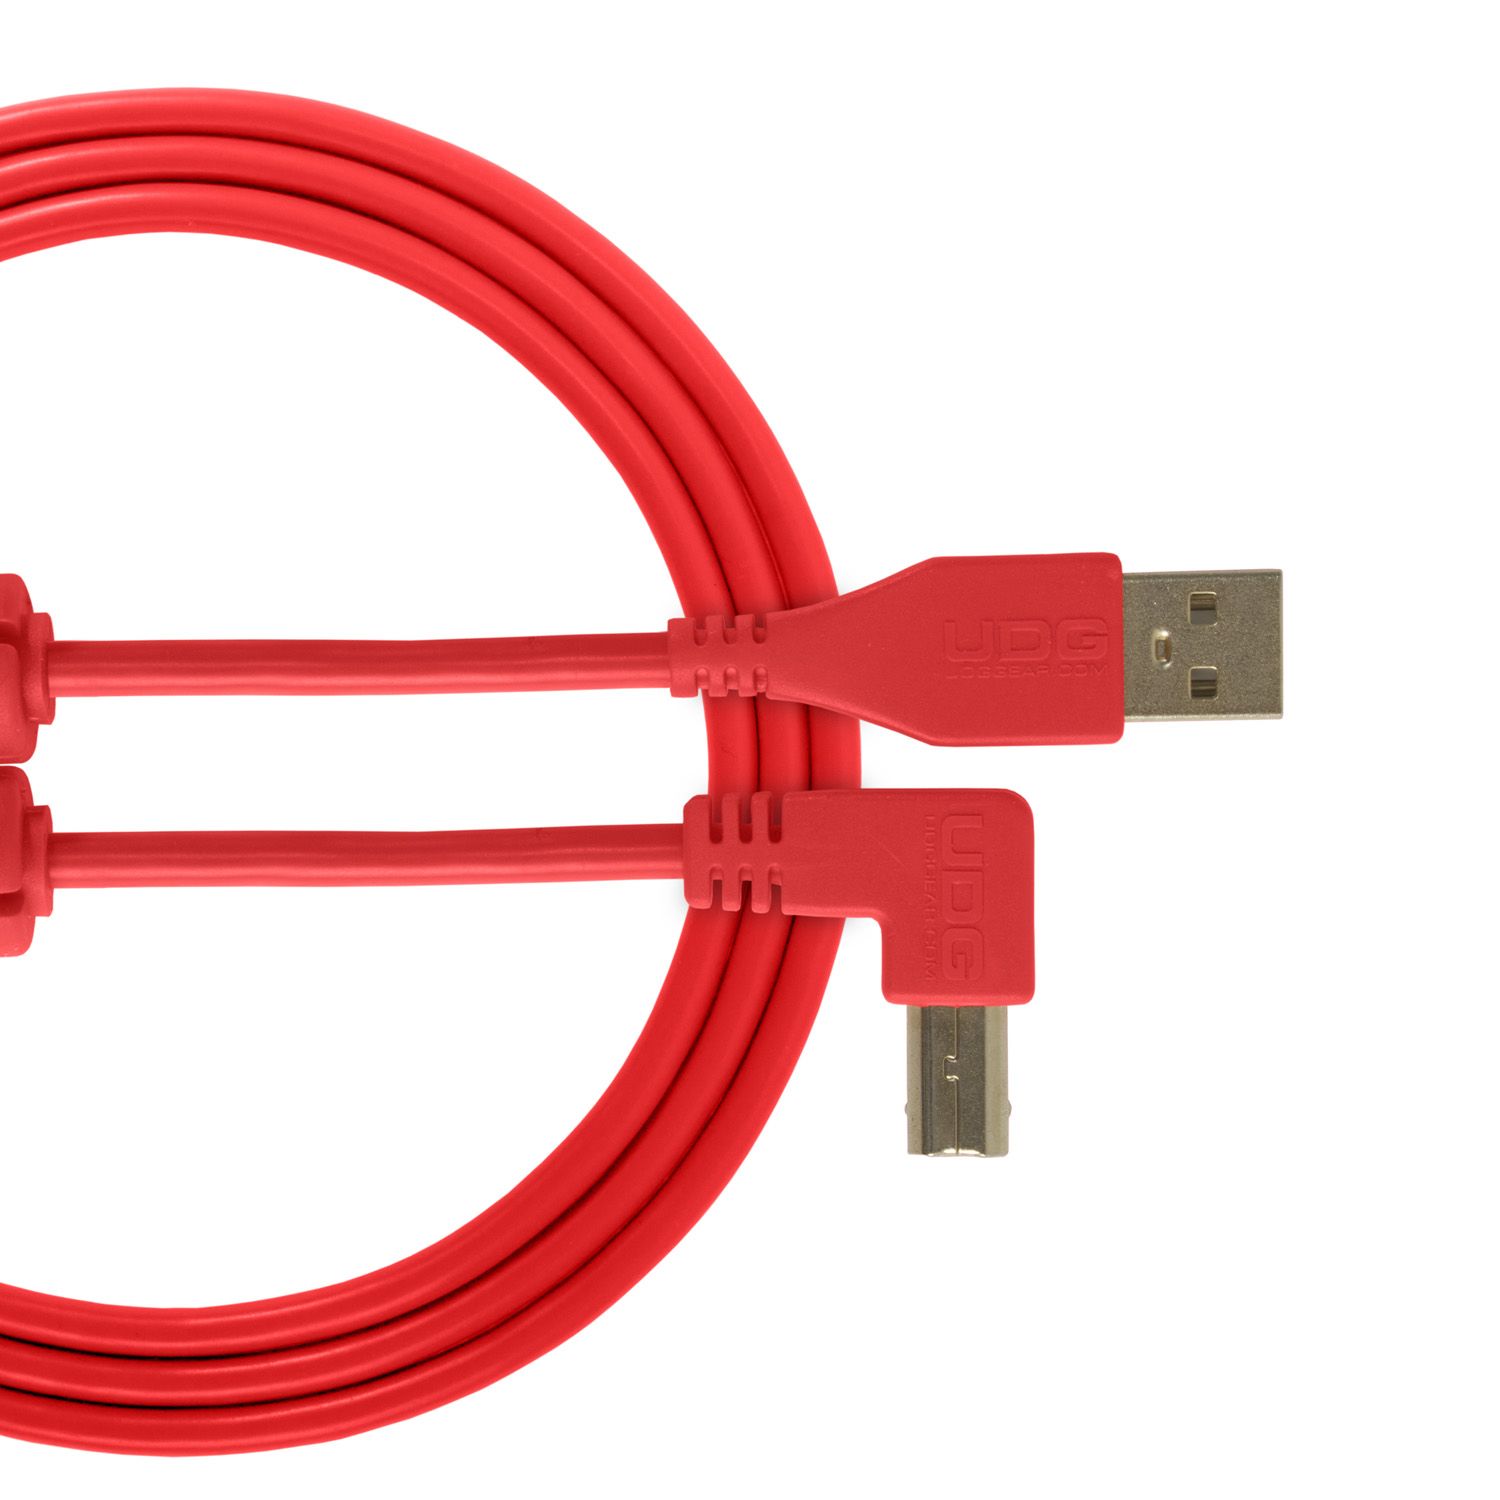 UDG Ultimate Audio Cable USB 2.0 A-B Red Angled RN7315